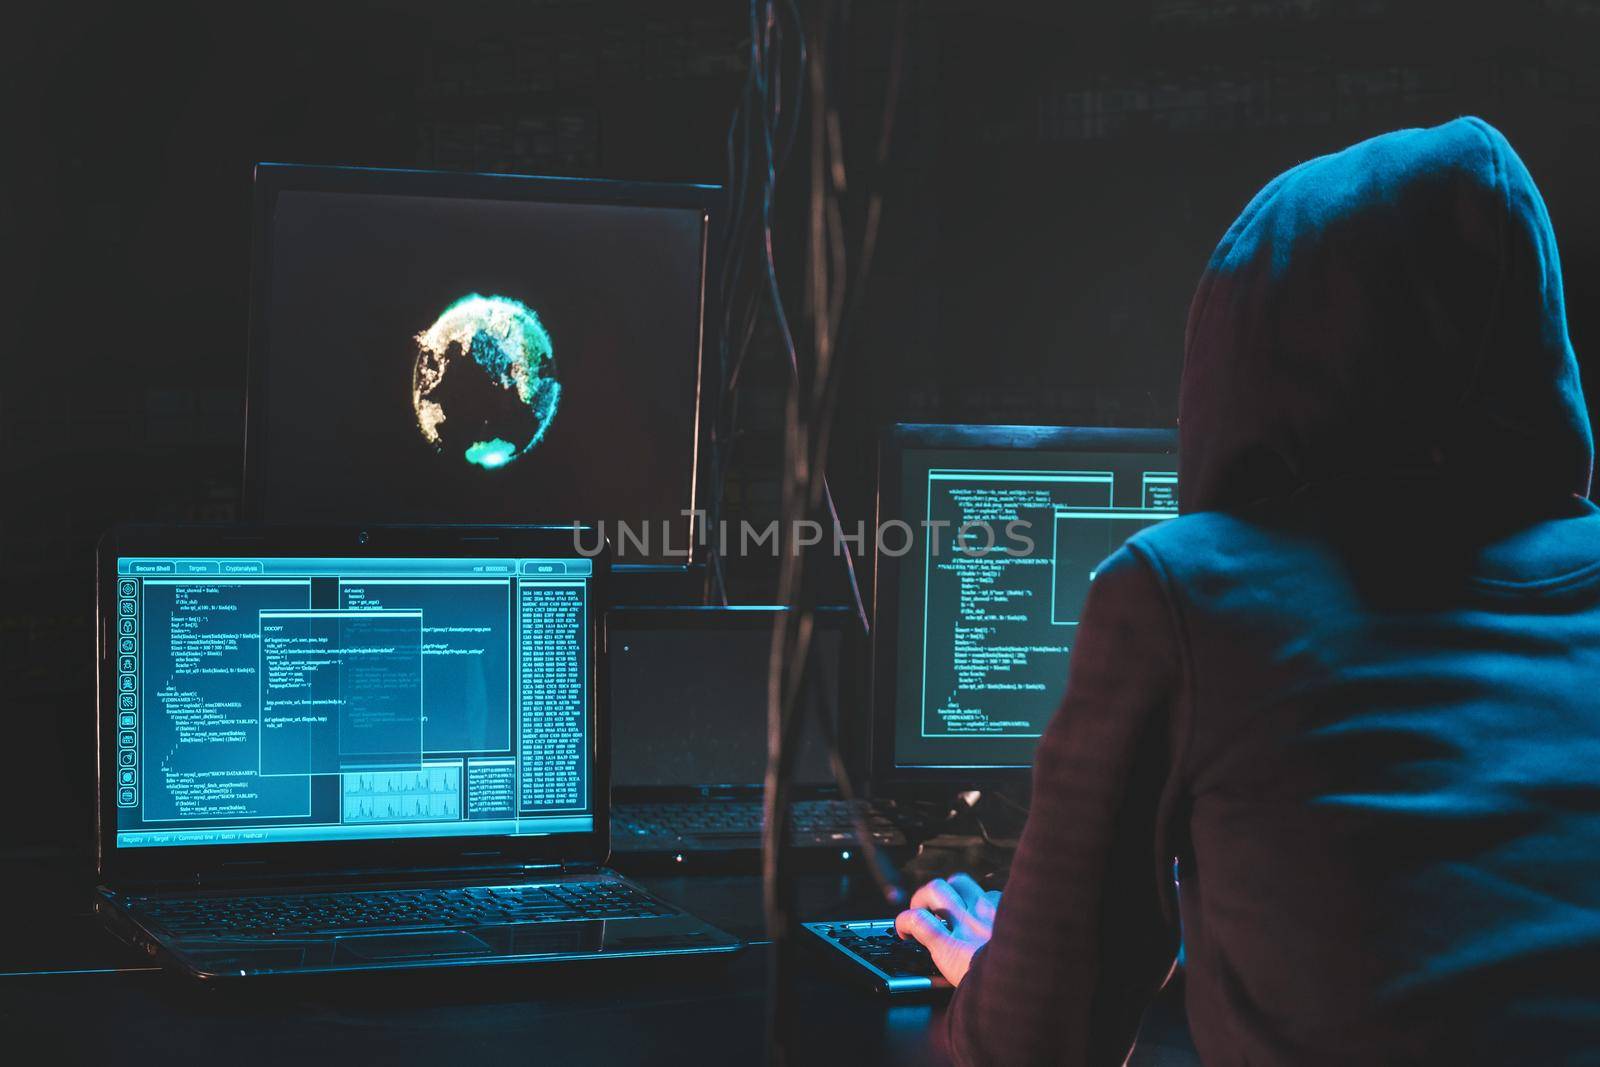 Back hooded hacker using malicious software hack corporate data center. malefactor hidden underground in dark place, multiple displays with phishing code and global map attack. Download photo